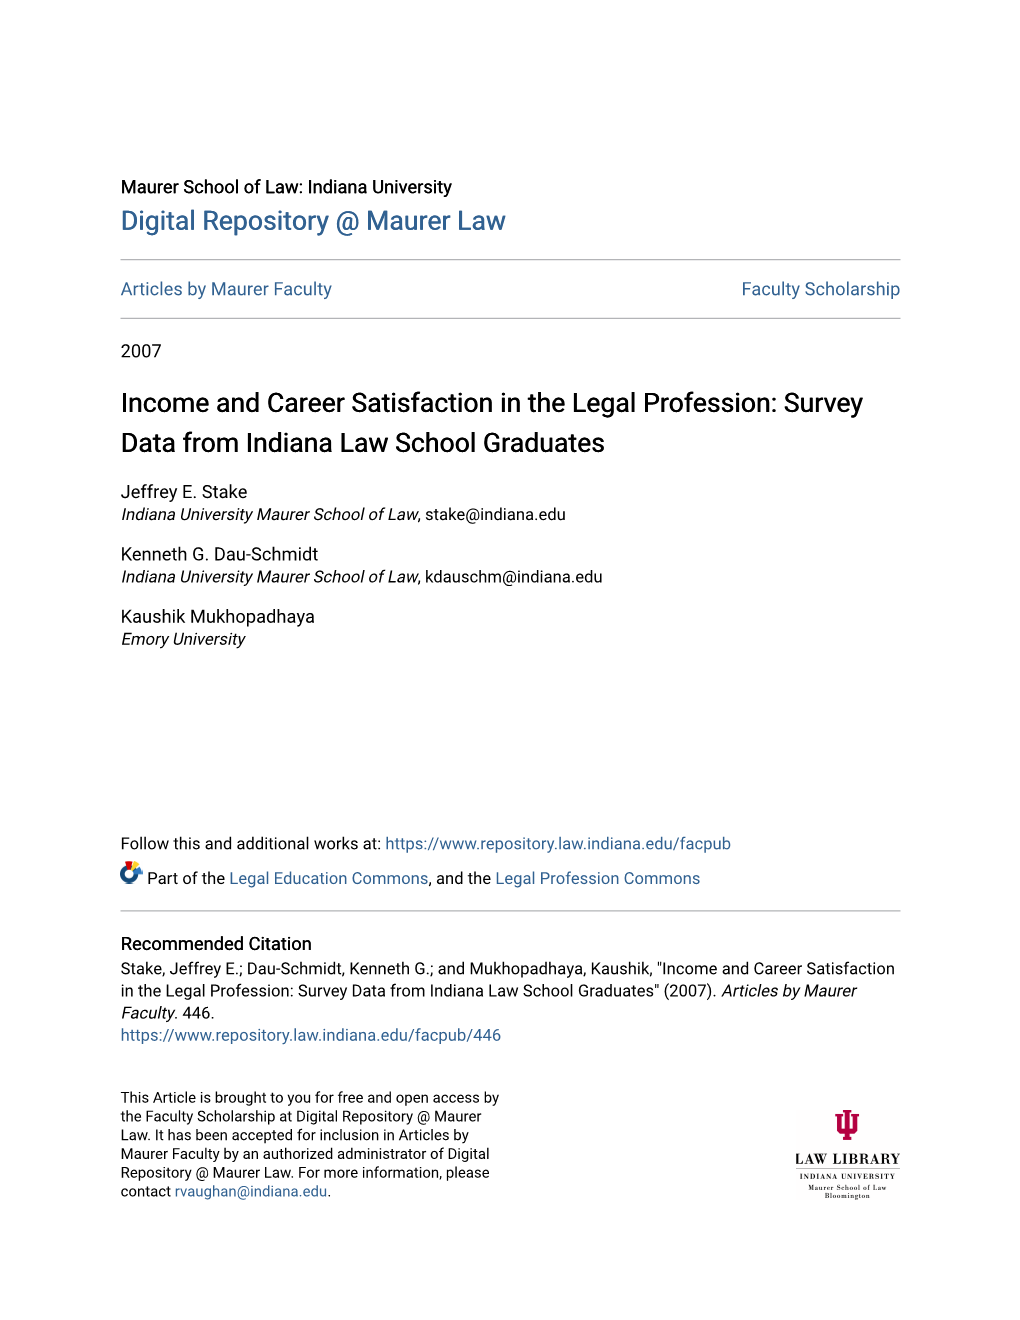 Income and Career Satisfaction in the Legal Profession: Survey Data from Indiana Law School Graduates